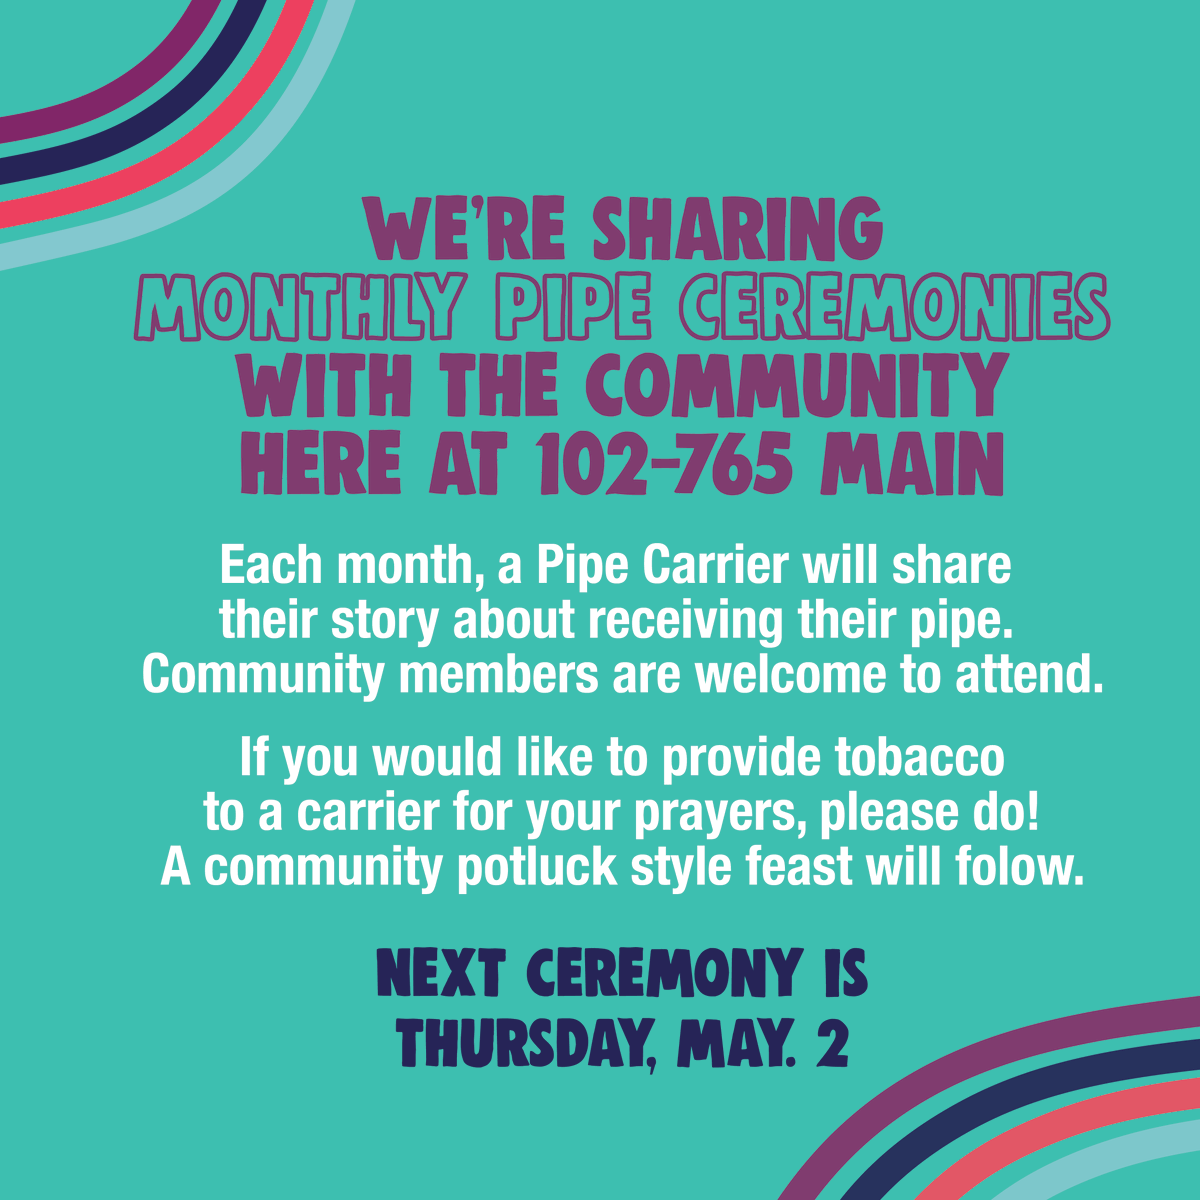 Tomorrow, May 2nd, we will be having a Pipe Ceremony at 9:30 a.m. All are welcome to attend! 

#GoAskAuntie 
#SexualHealthAwareness
#GetTested
#STBBIAwareness
#SexualHealth
#SexualWellness
#StopTheStigma
#SexualHealthServices
#IndigenousSexualHealth
#IndigenousClinic